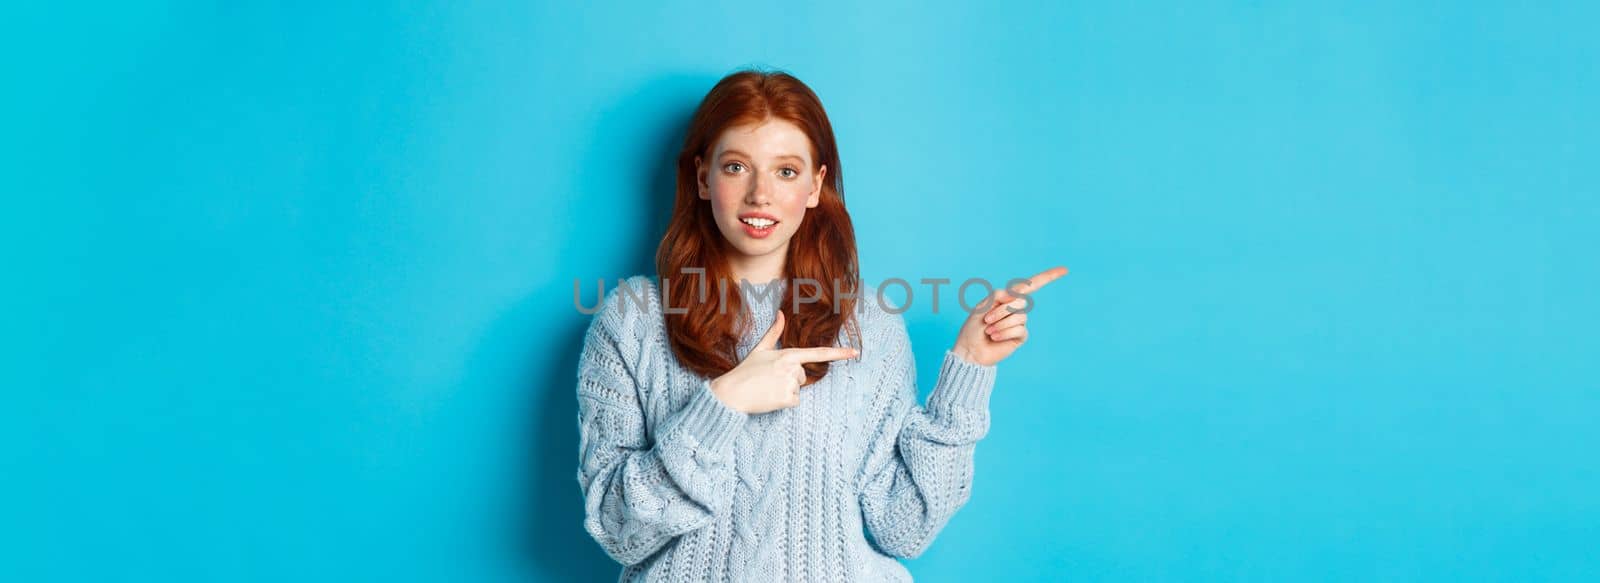 Image of pretty redhead girl in sweater, pointing fingers left at logo, smiling curious, standing over blue background.